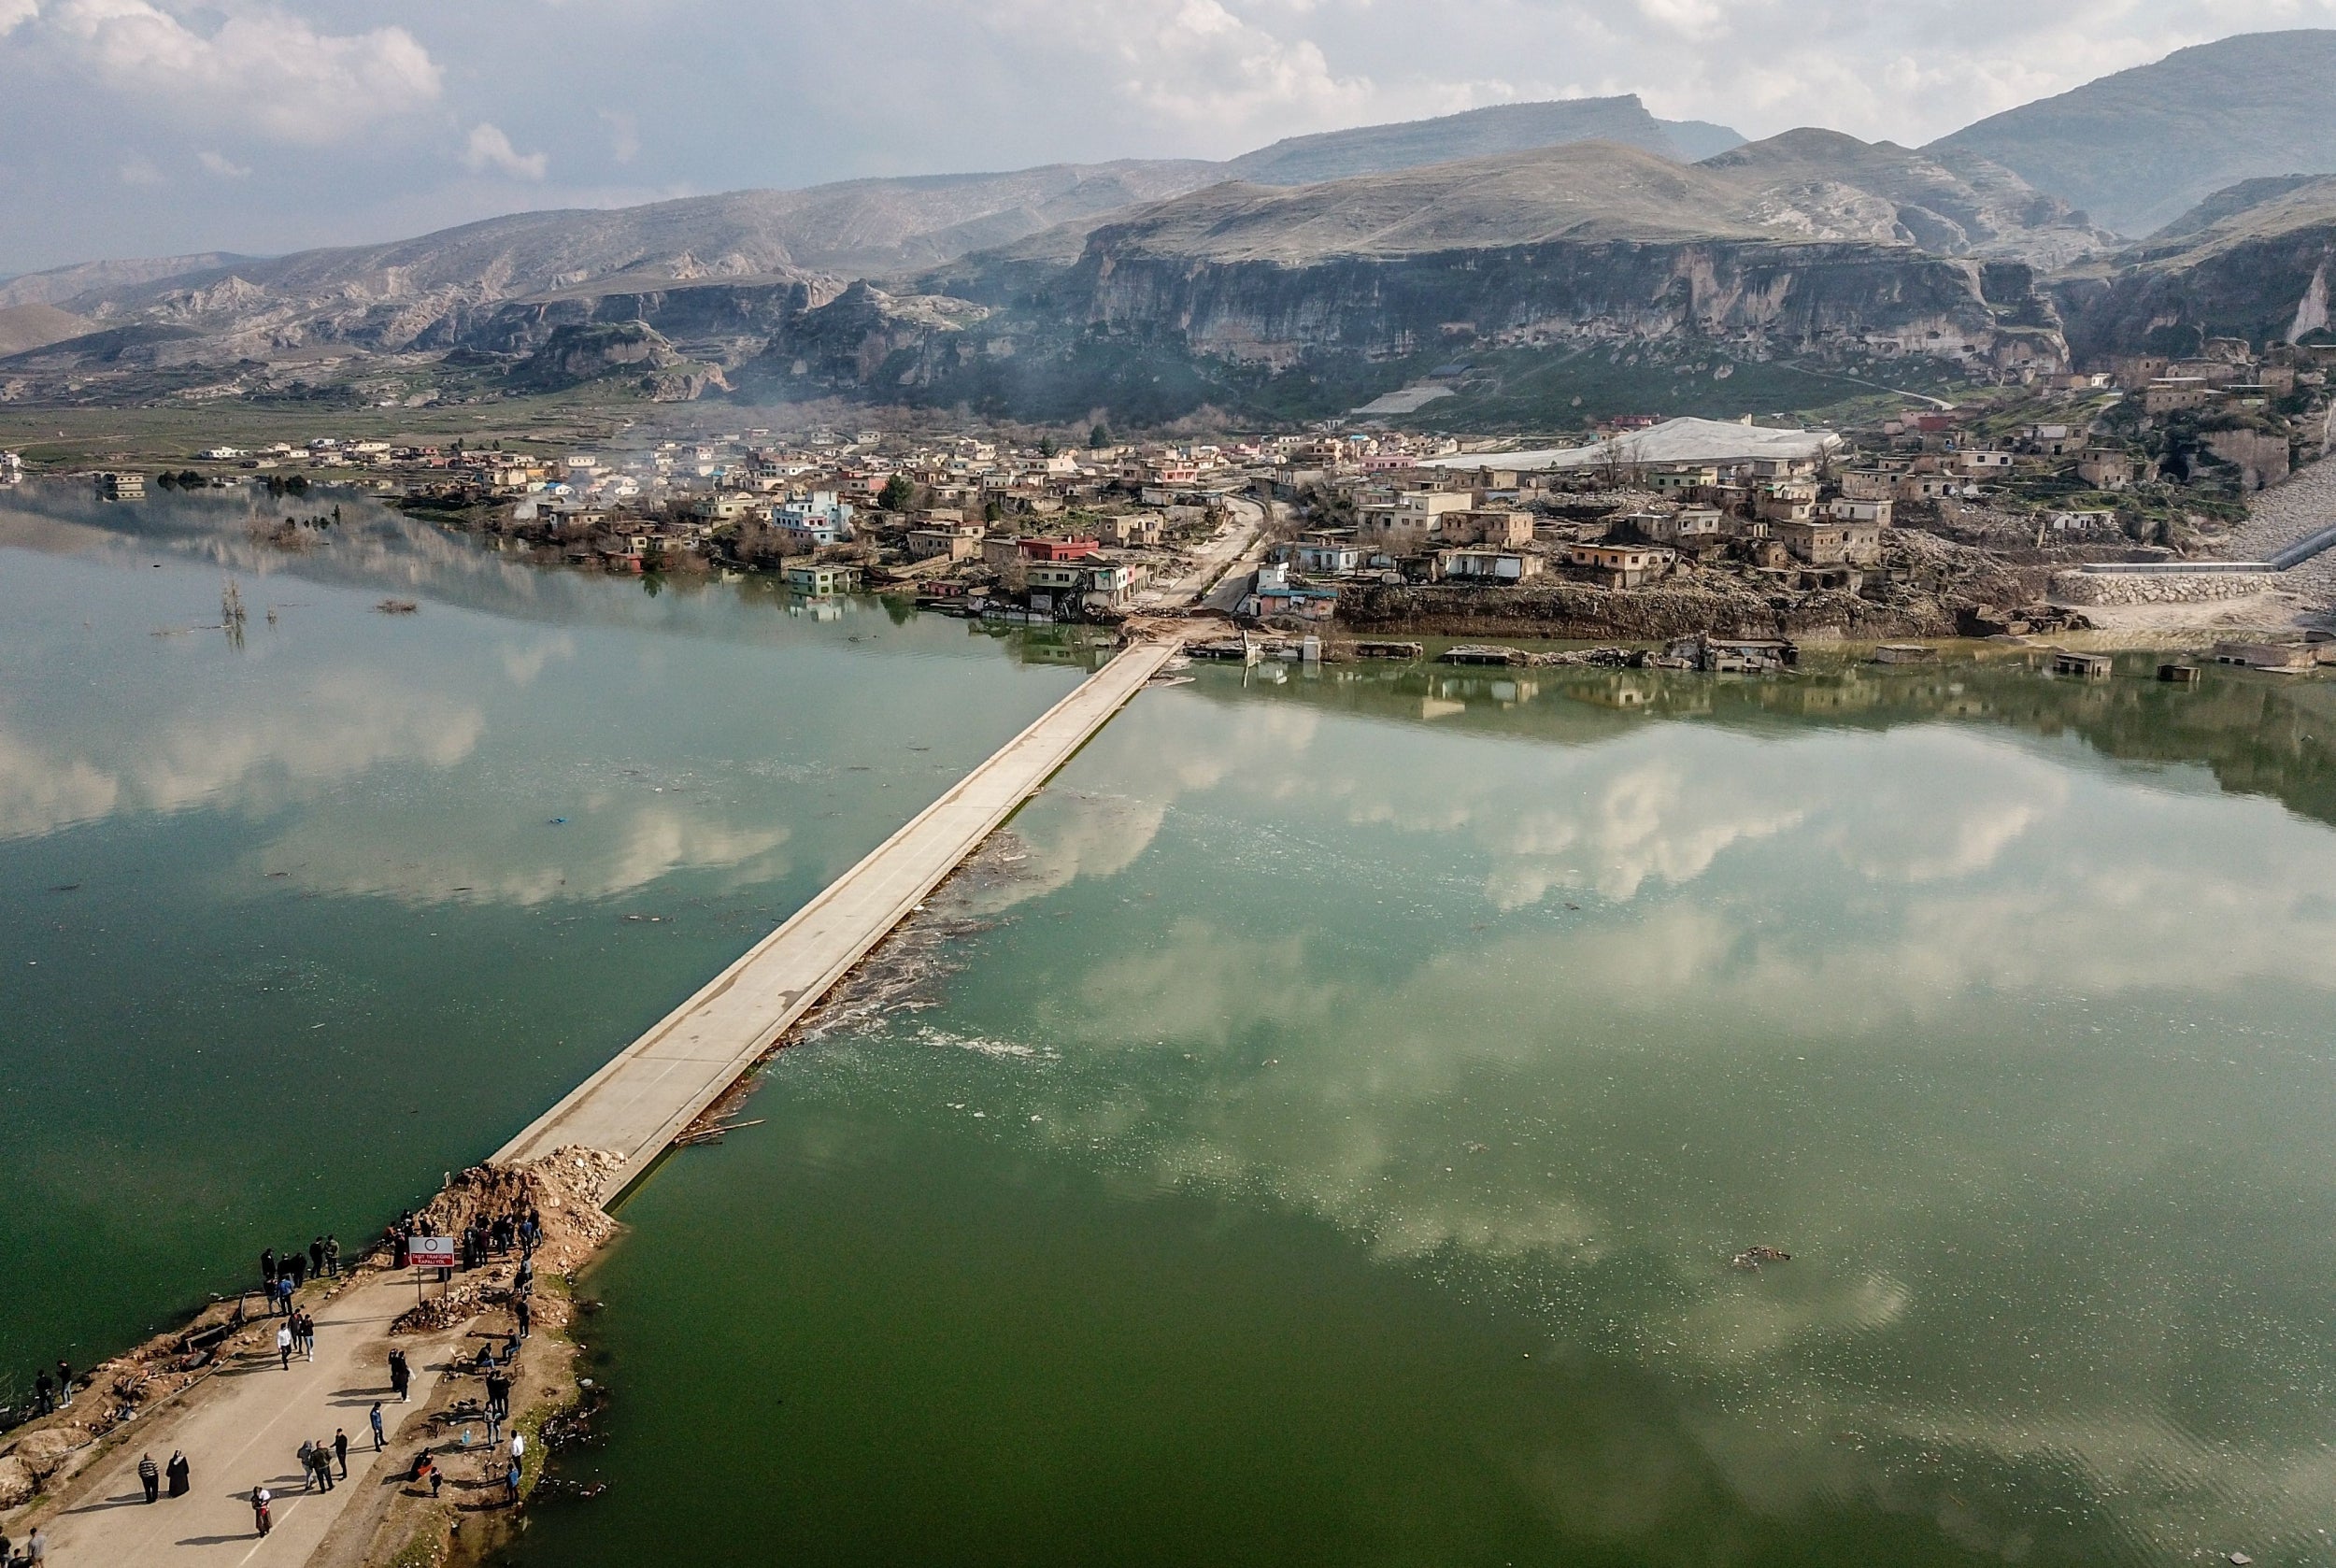 Hasankeyf, on the banks of the Tigris River